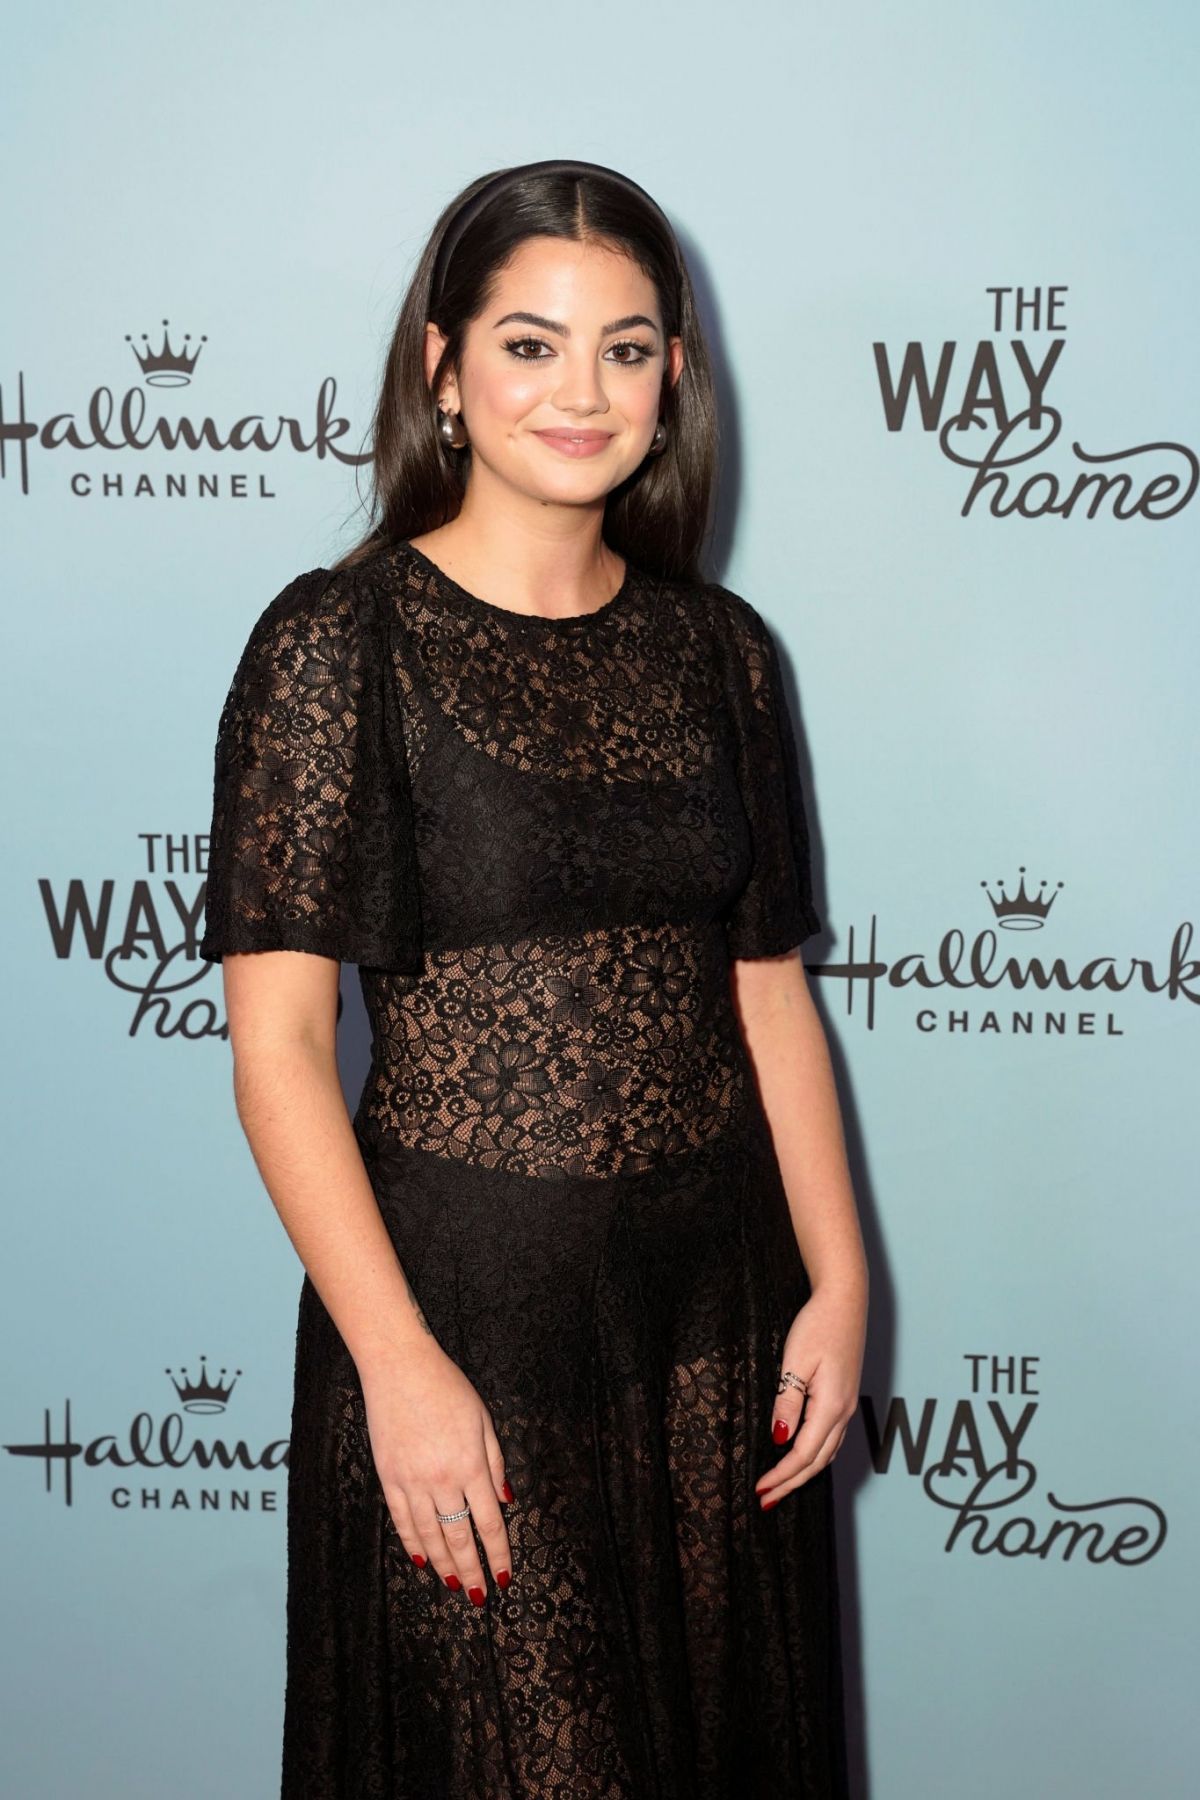 Sadie Laflamme-Snow attends at The Way Home Screening in Hollywood 6